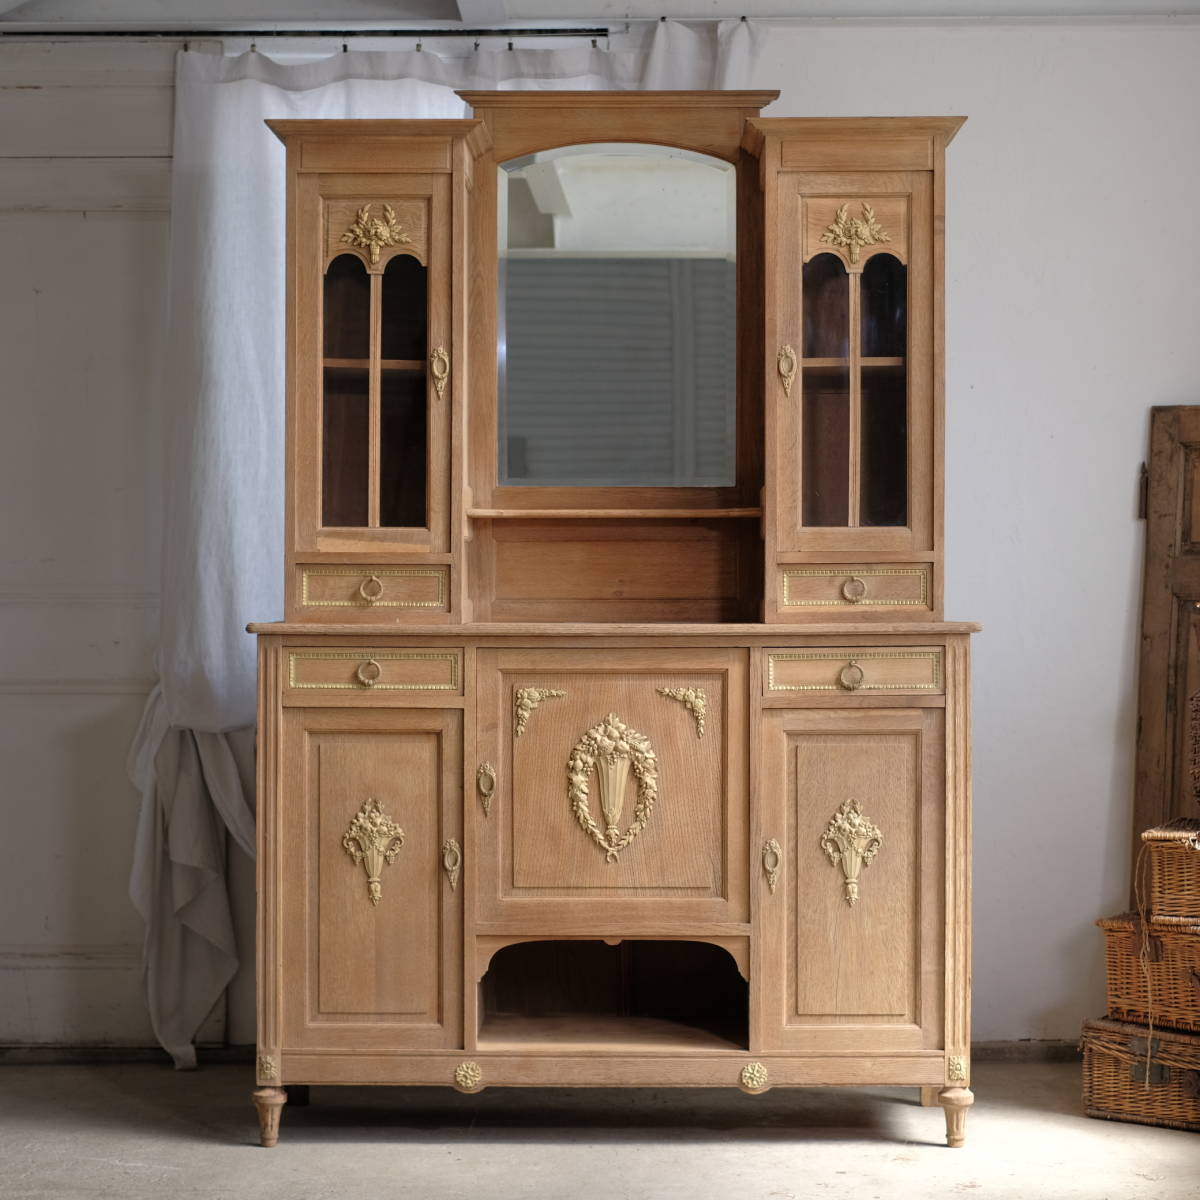  France antique * French cabinet * antique furniture / Vintage /bro can to/ natural / store furniture / display 